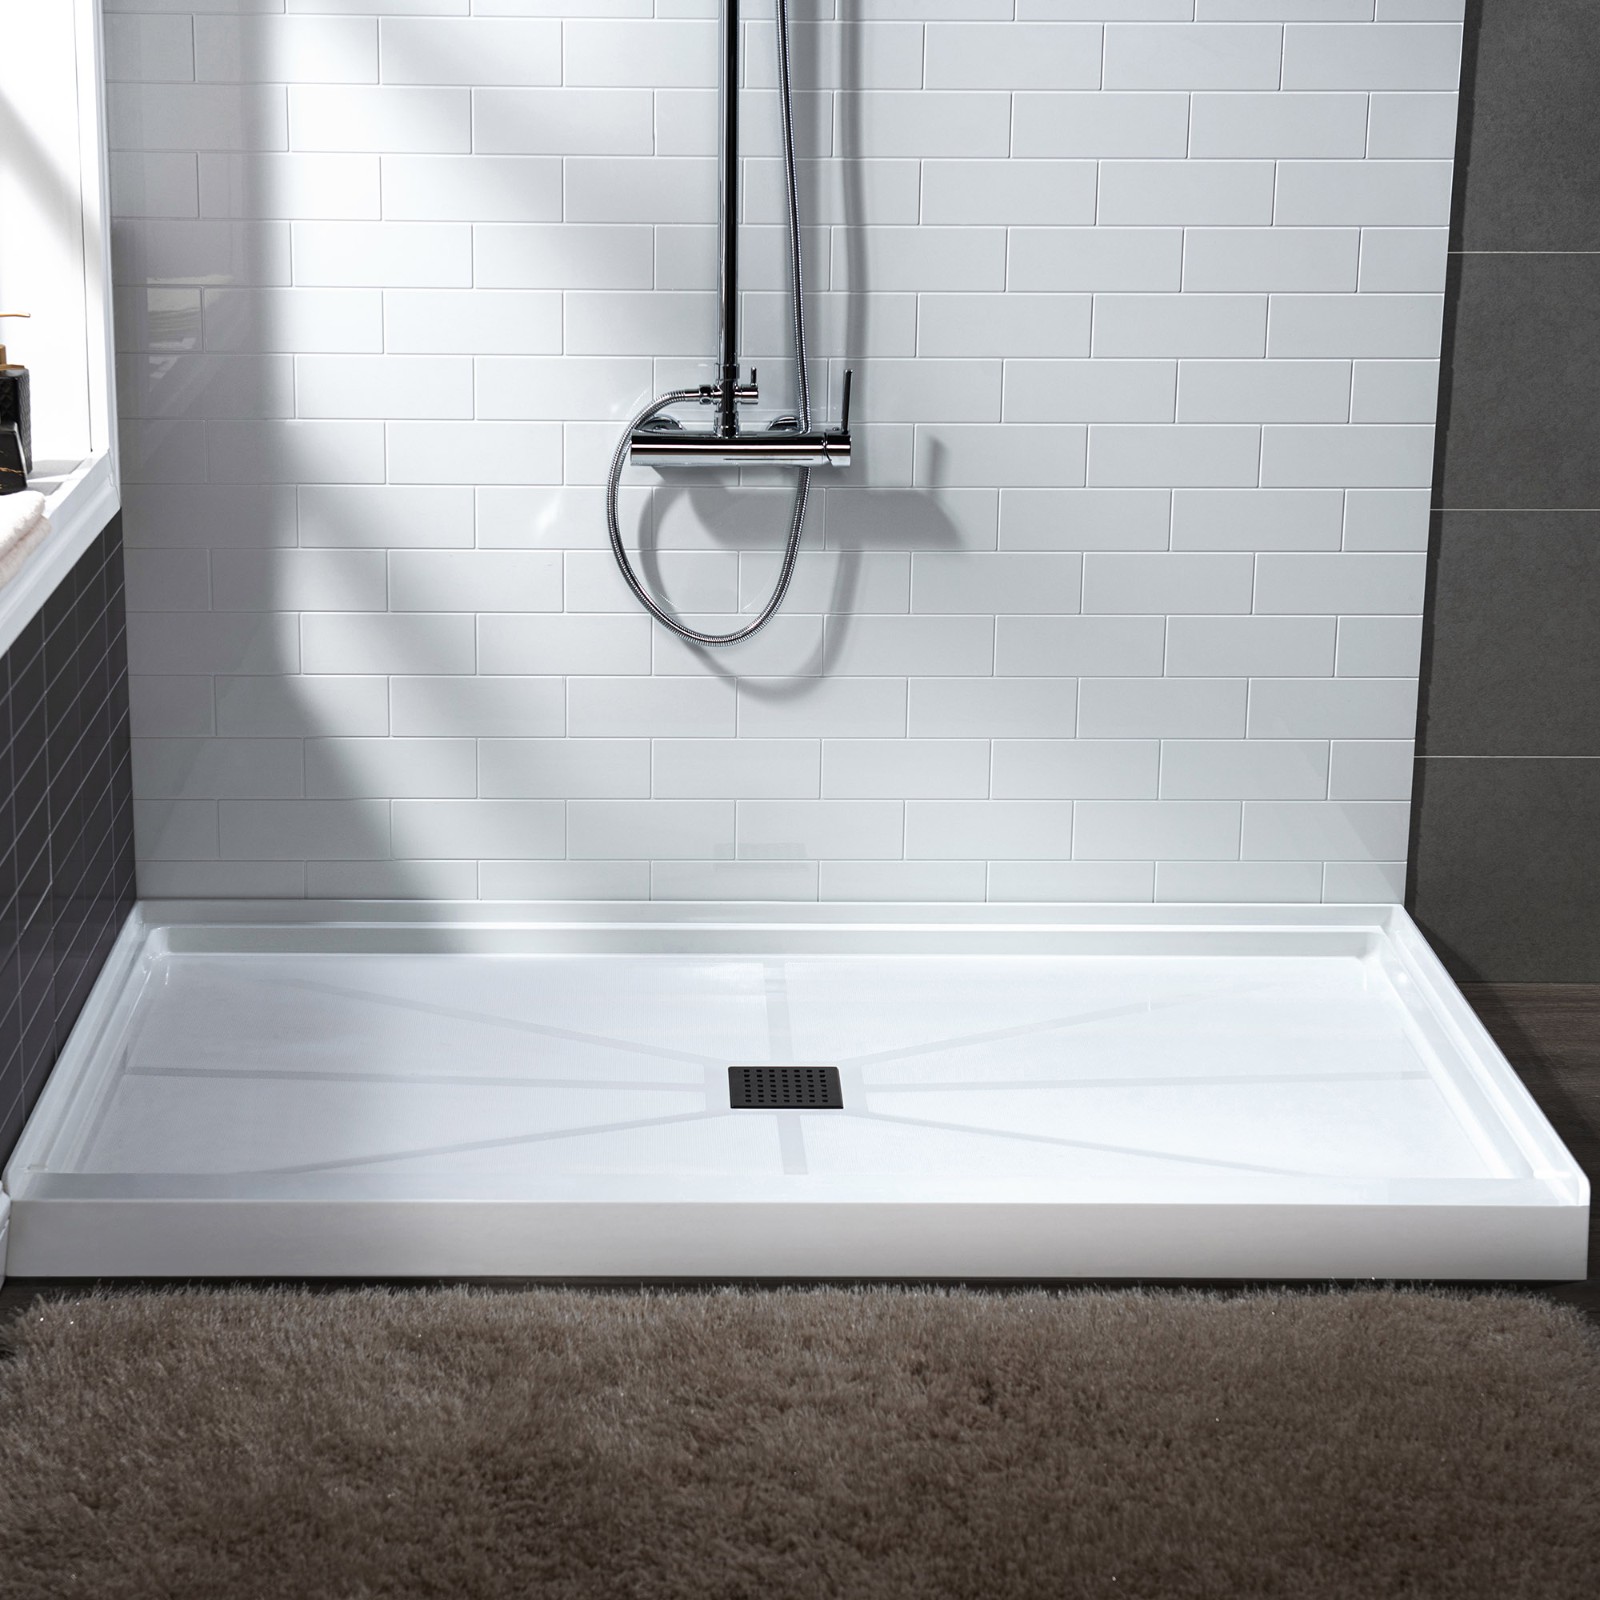  WOODBRIDGE SBR6032-1000C-MB SolidSurface Shower Base with Recessed Trench Side Including Matte Black Linear Cover, 60